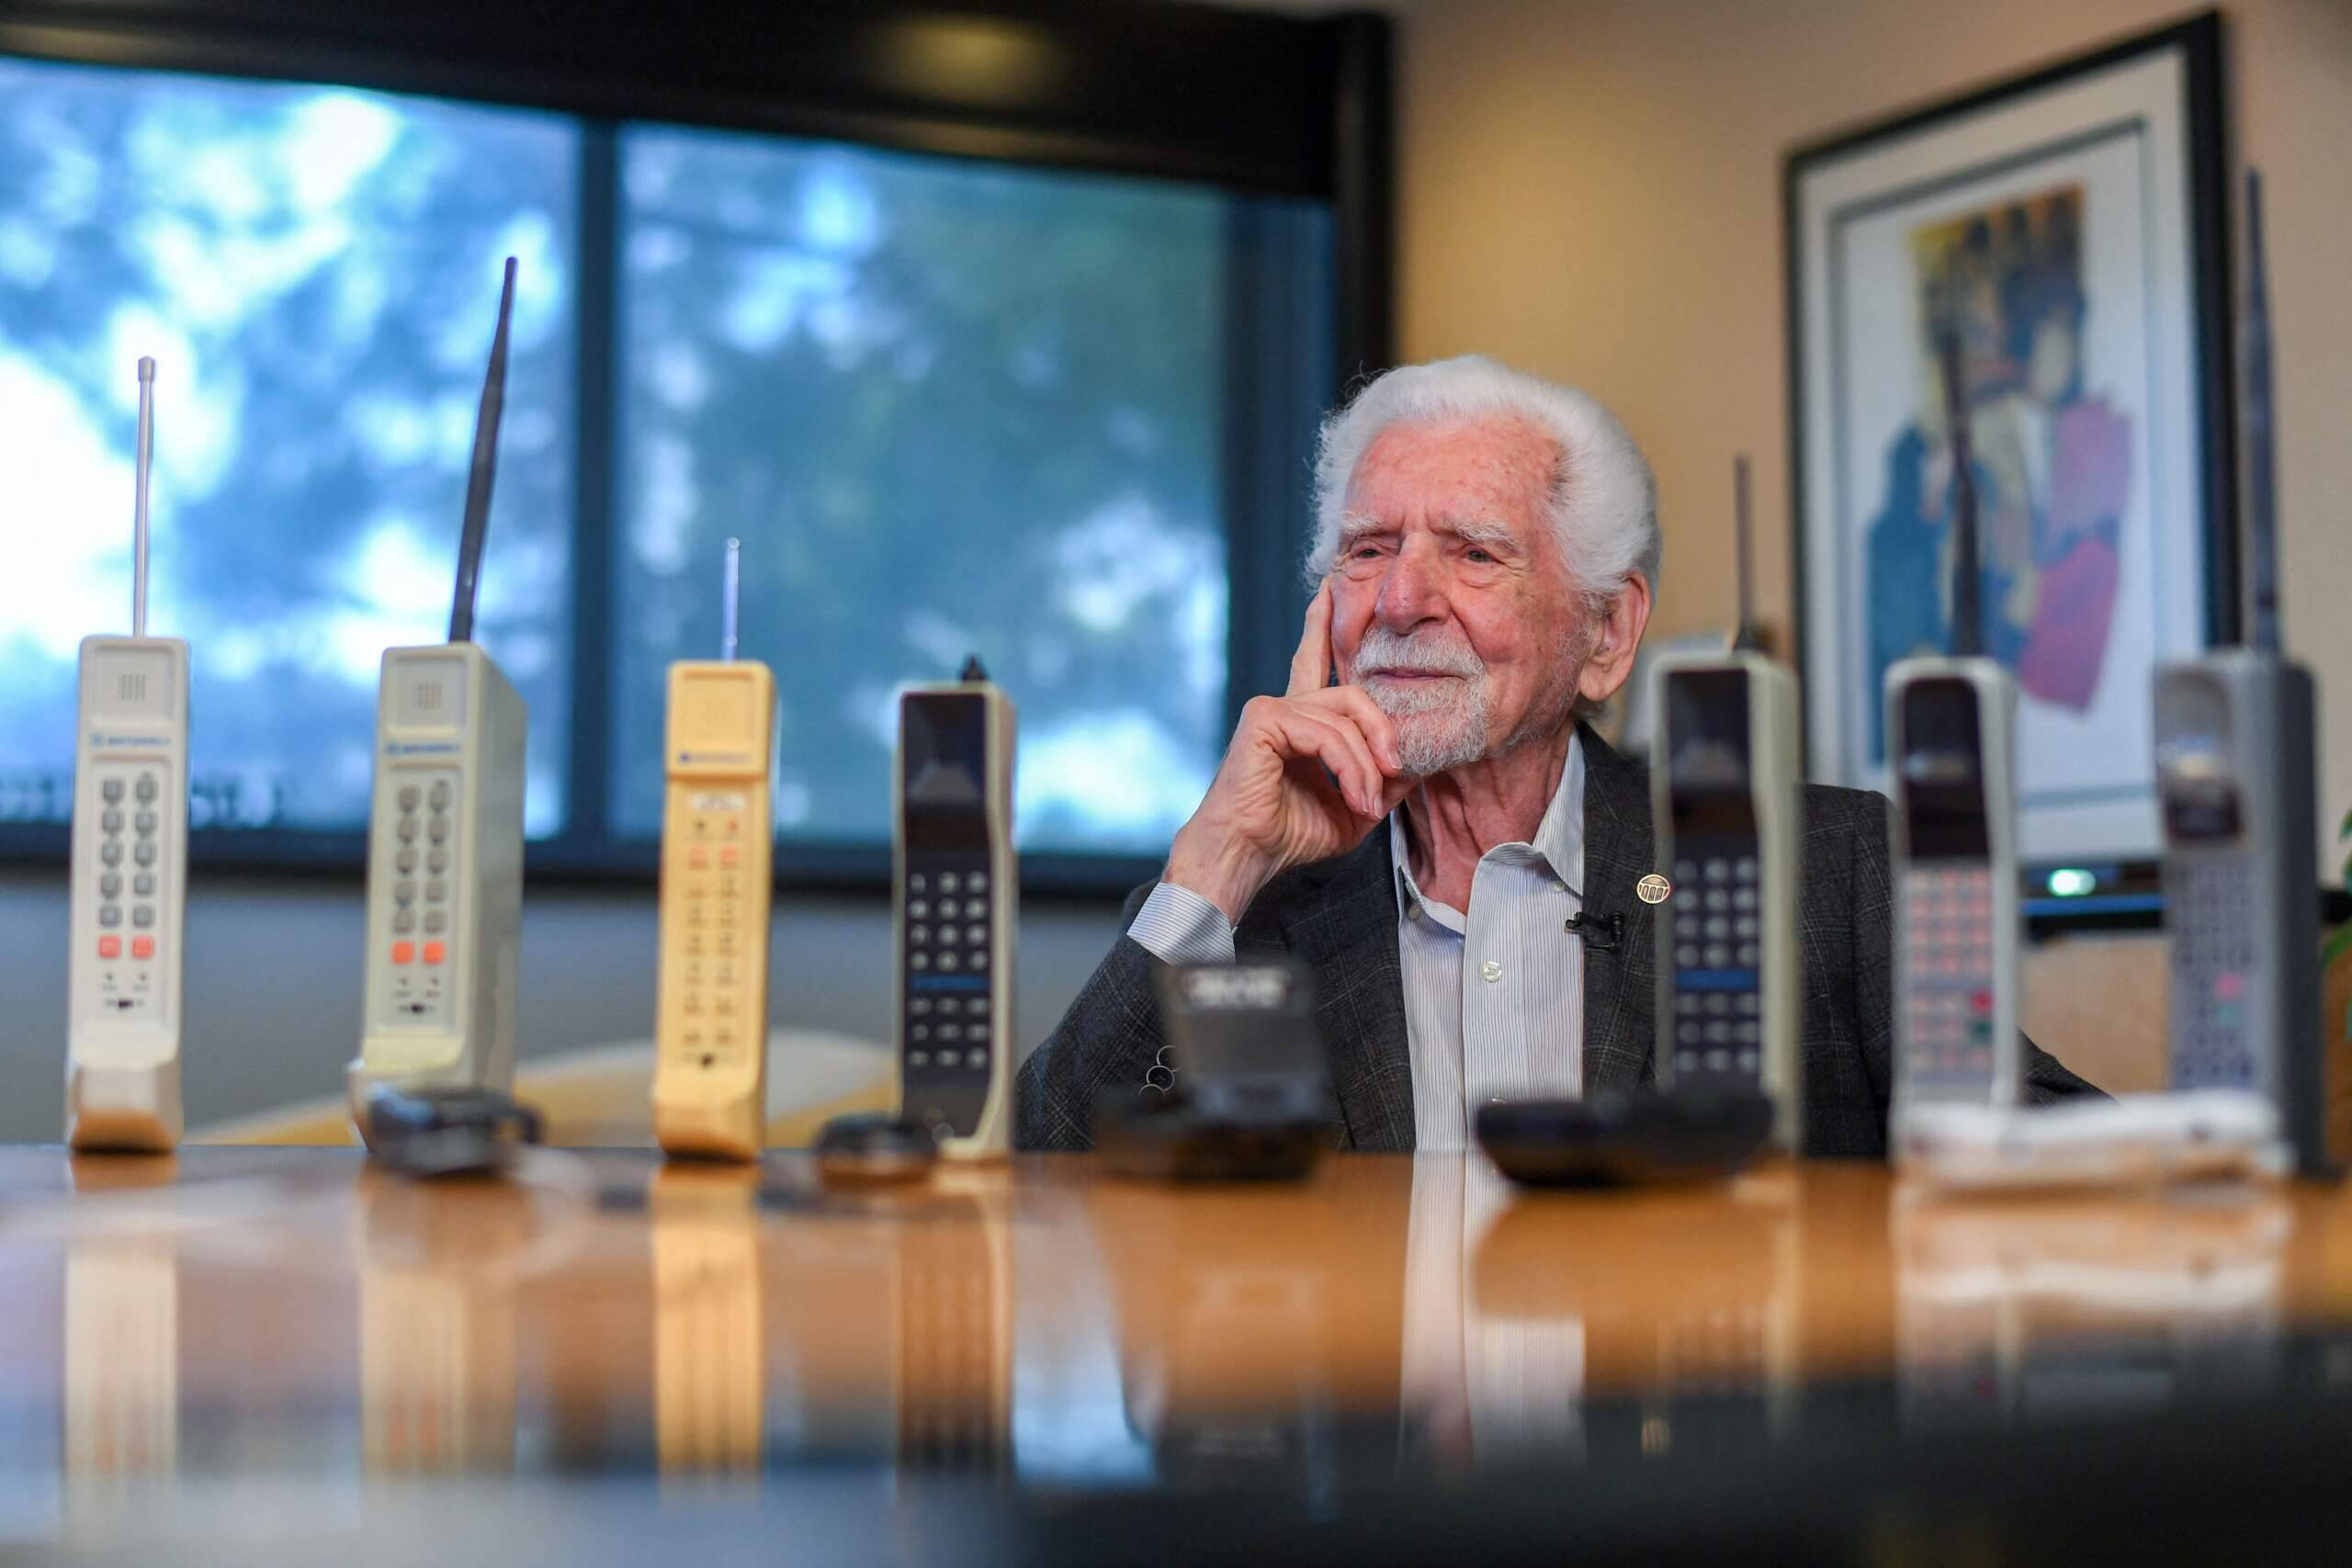 Engineer Martin Cooper, the man who invented cell phones 50 years ago, poses for a photo in Del Mar, California, in March 2023. (Valerie Macon/AFP via Getty Images)